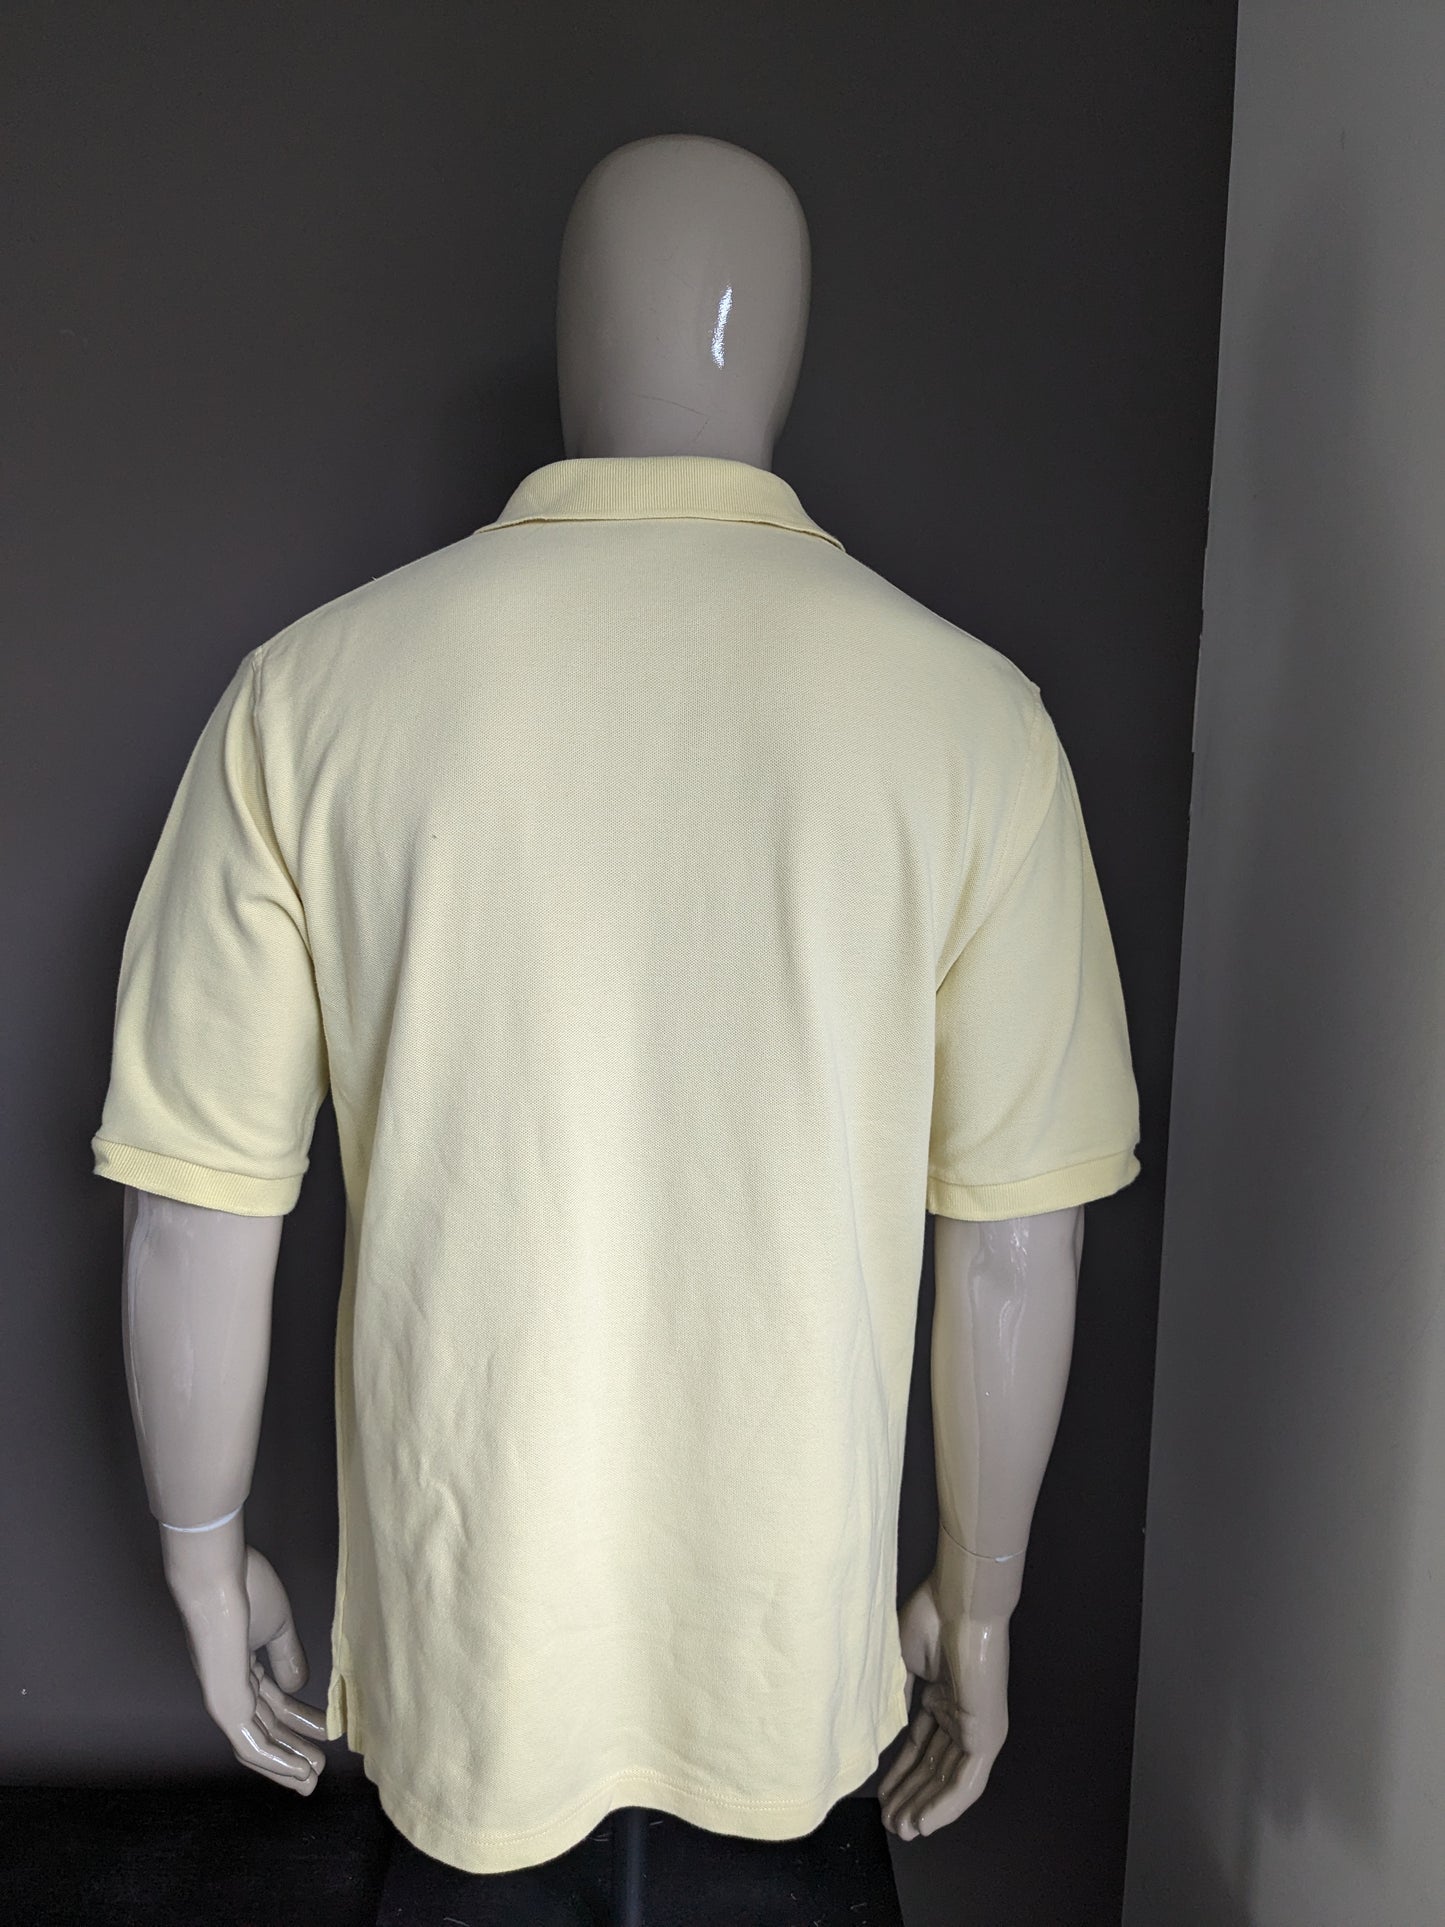 Vintage Glenmuir "Ryder Cup 97" Polo. Couleur jaune clair. Taille L.